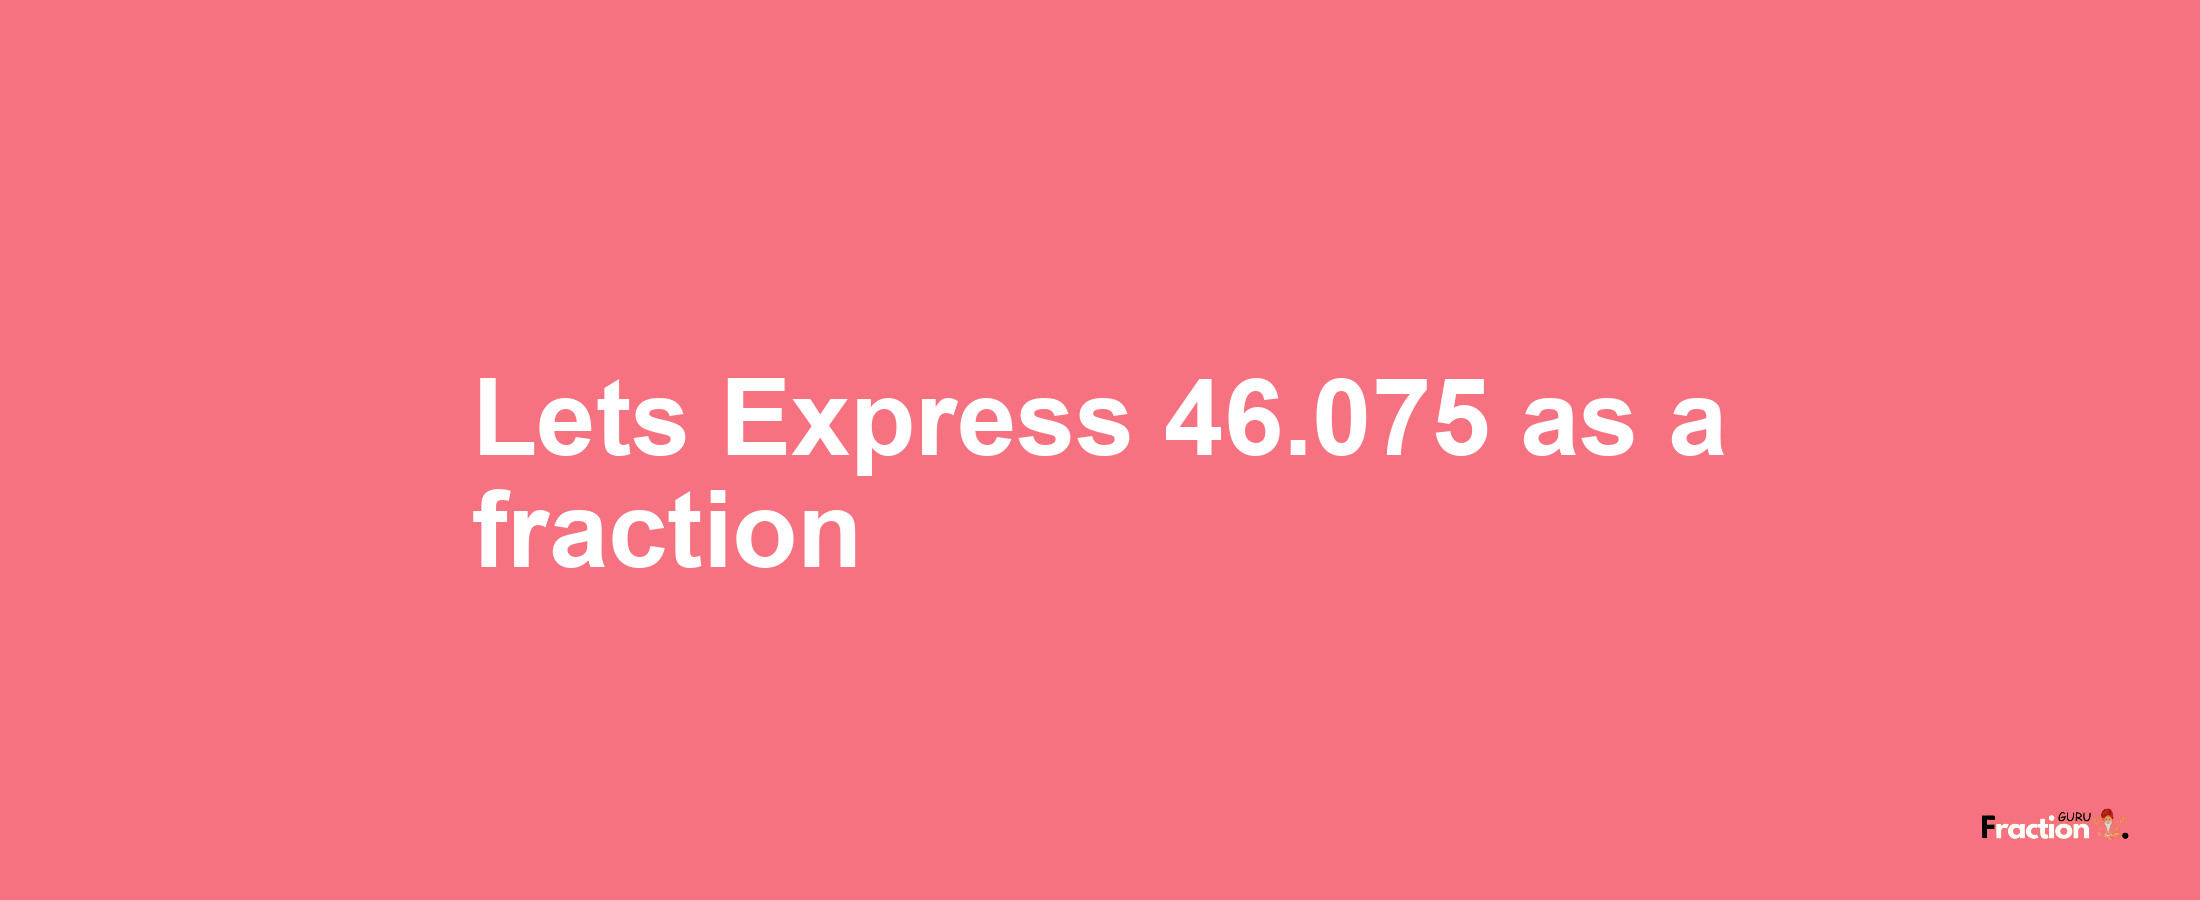 Lets Express 46.075 as afraction